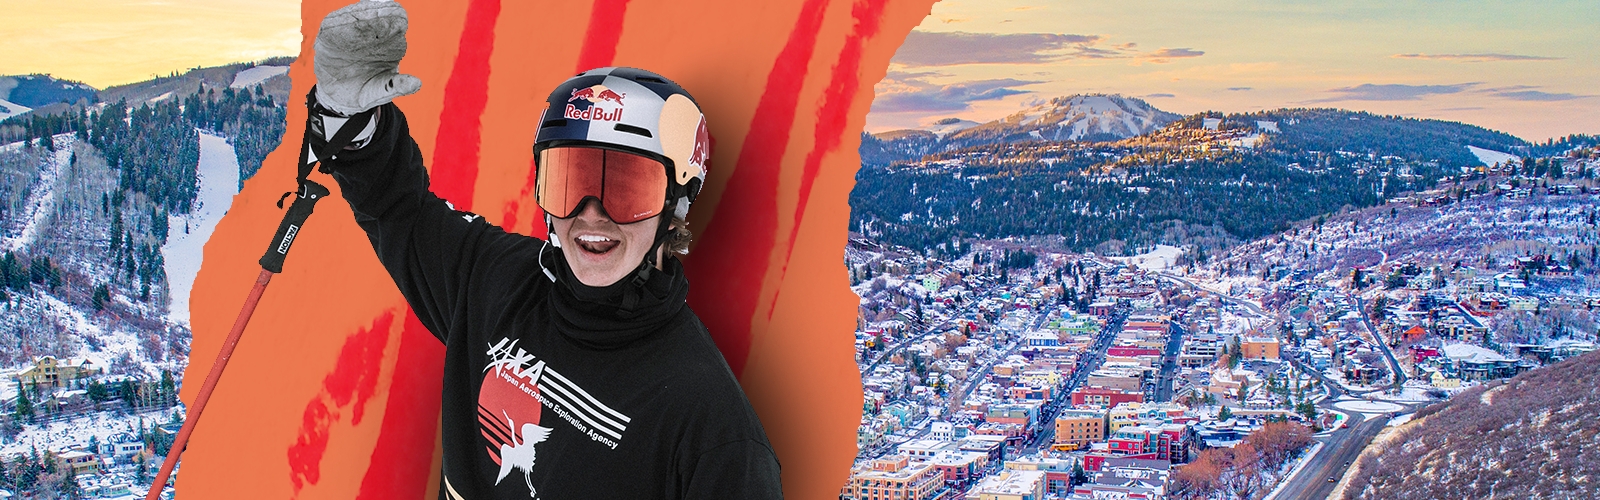 Olympic Skier Mac Forehand Shares Where to Eat, Stay, And Play In Park City, Utah